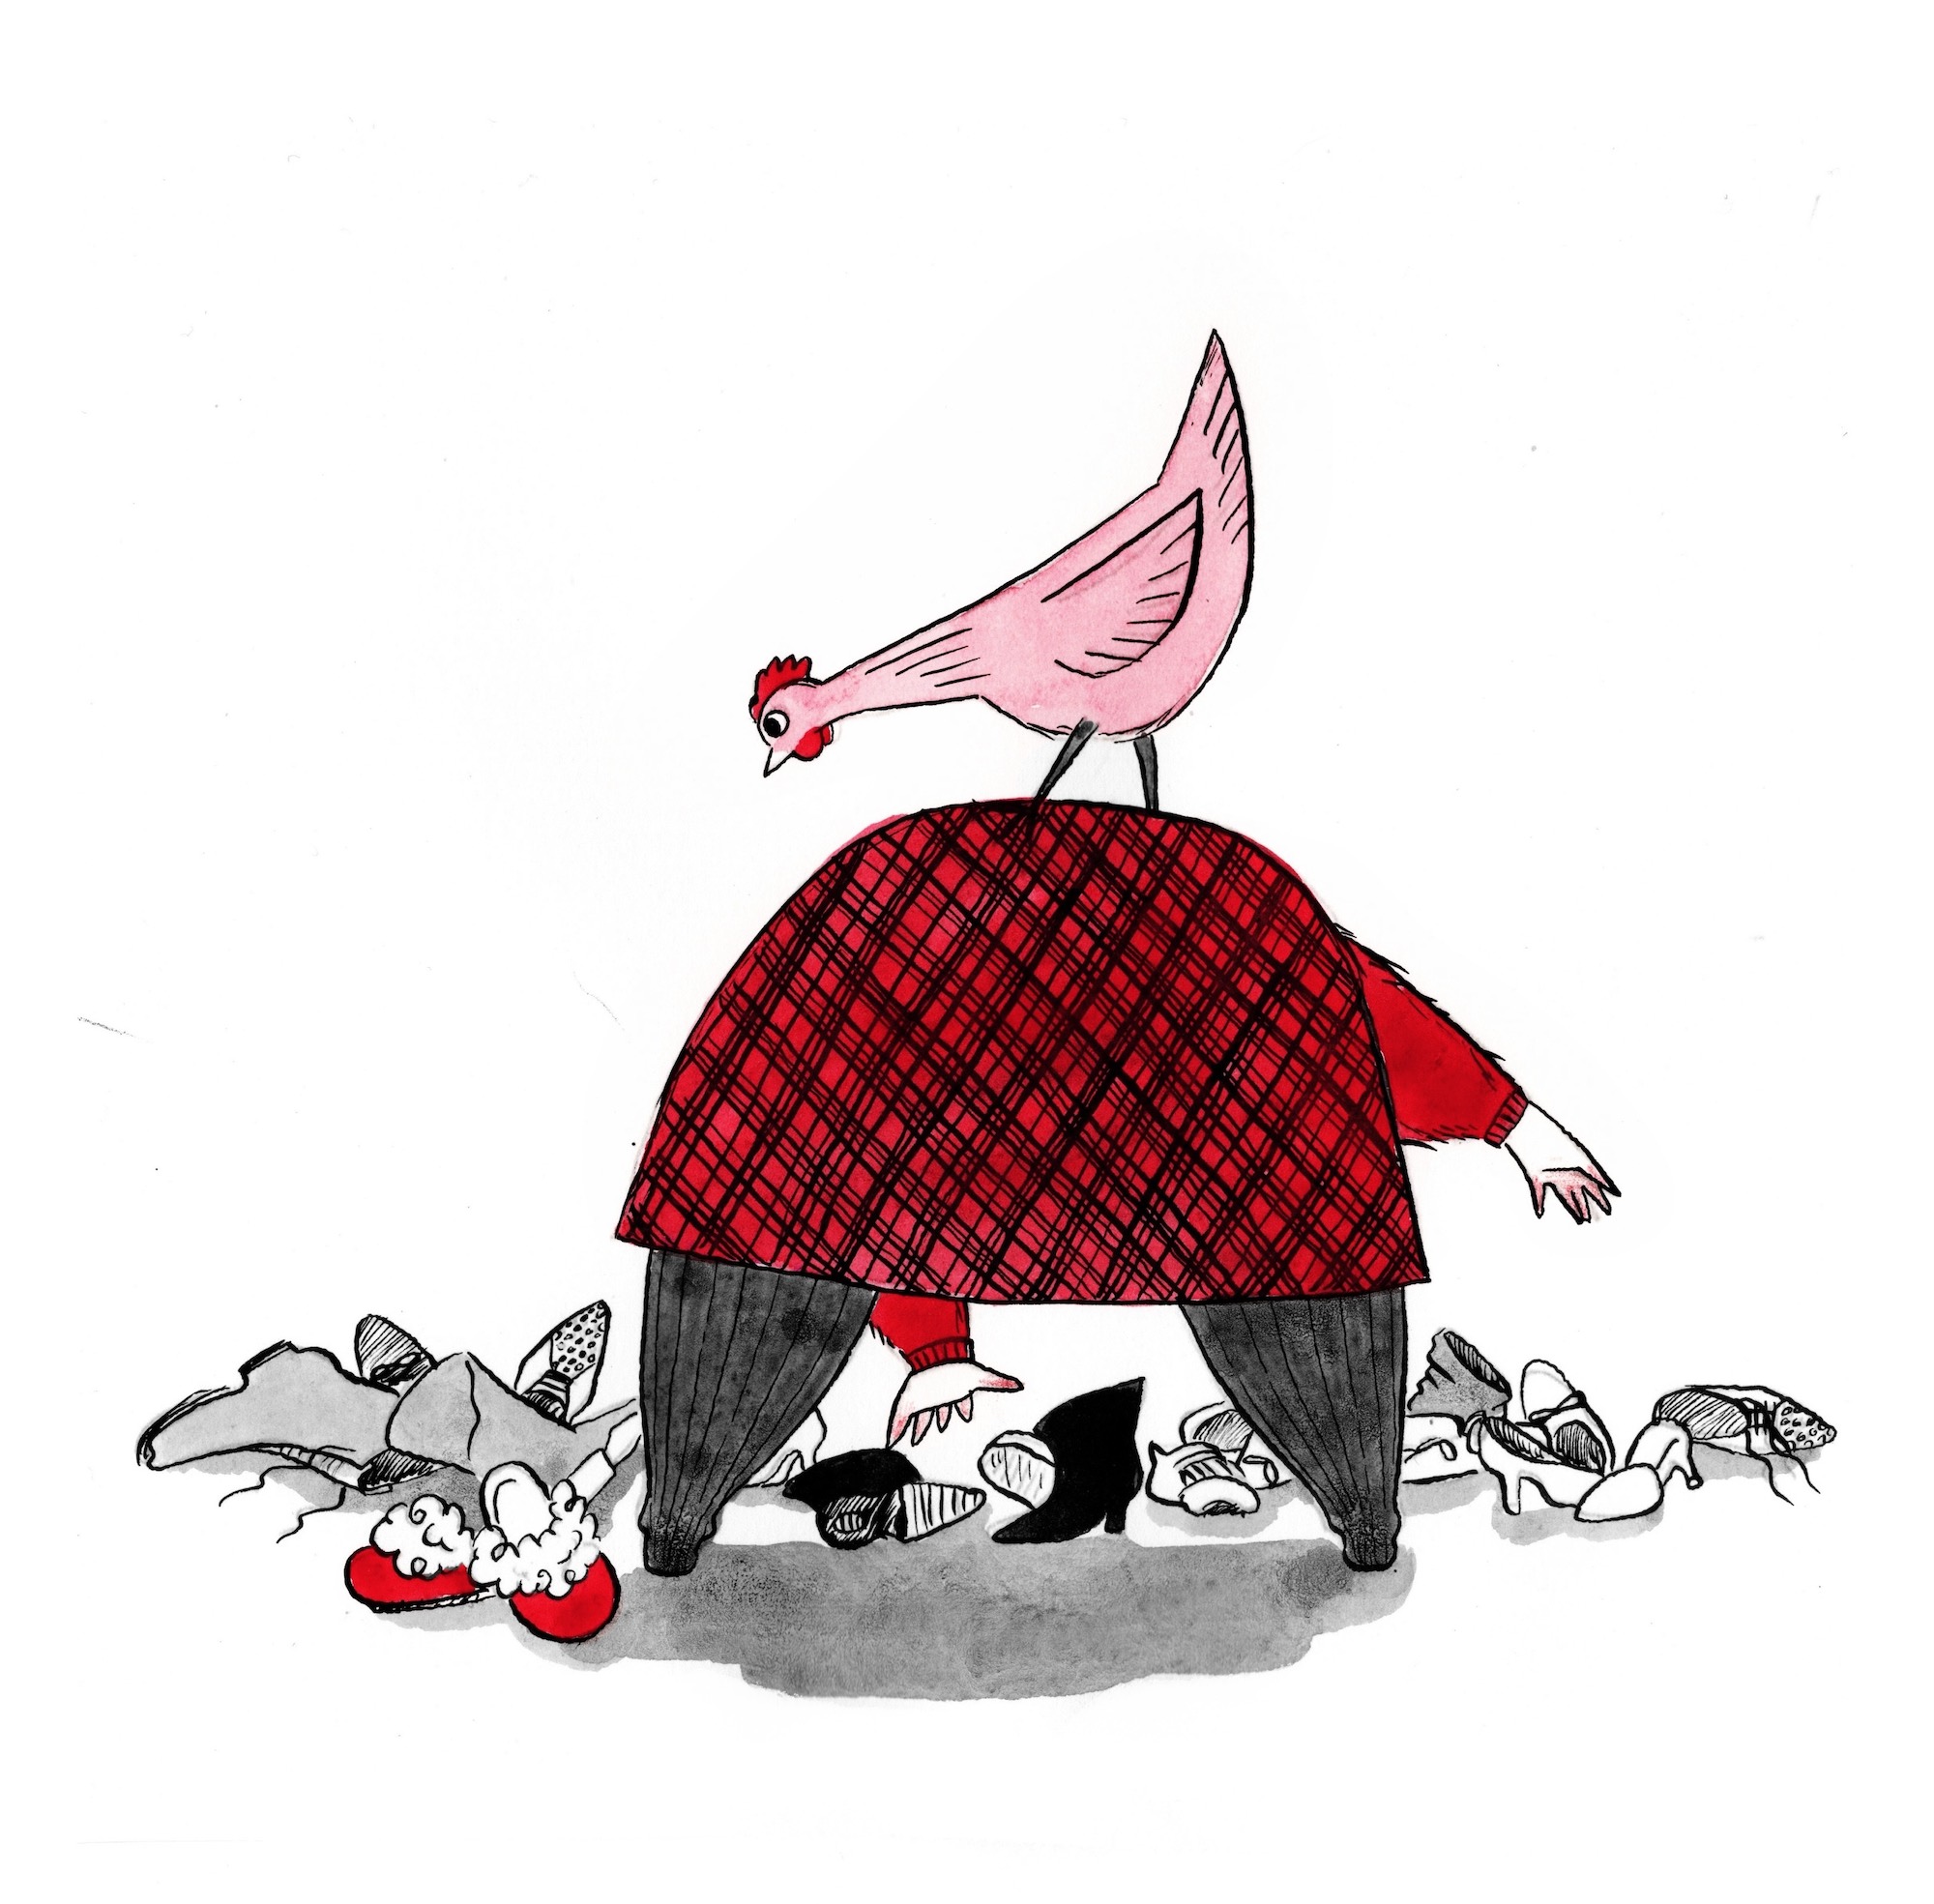 Black and white and red ink illustration of a woman bending over with a chicken perched on her back. The woman is looking for a matching pair of shoes from lots of shoes that are scattered across the floor in front of her.